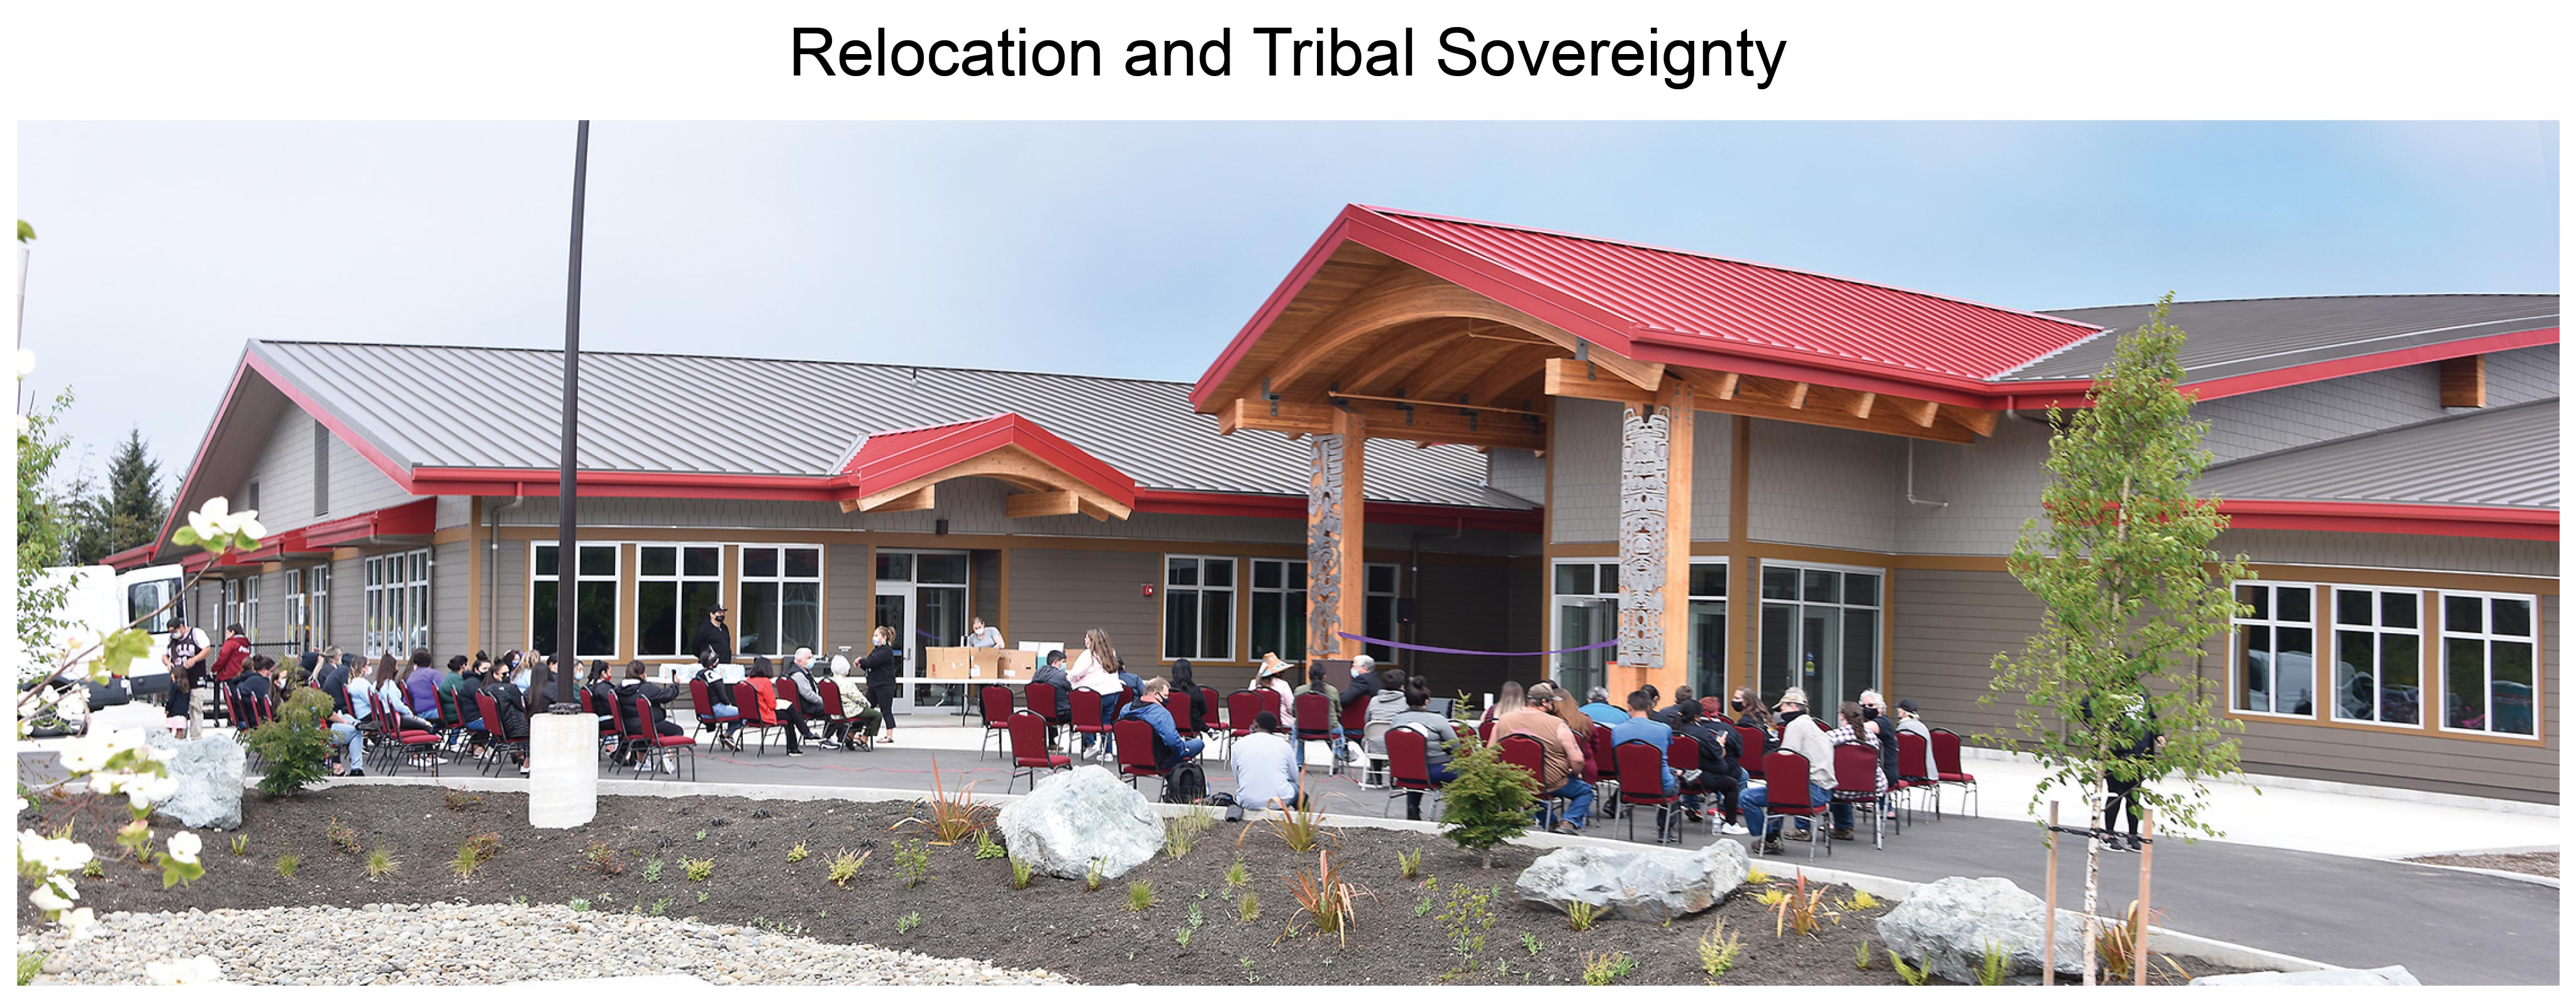 Relocation and Tribal Sovereignty